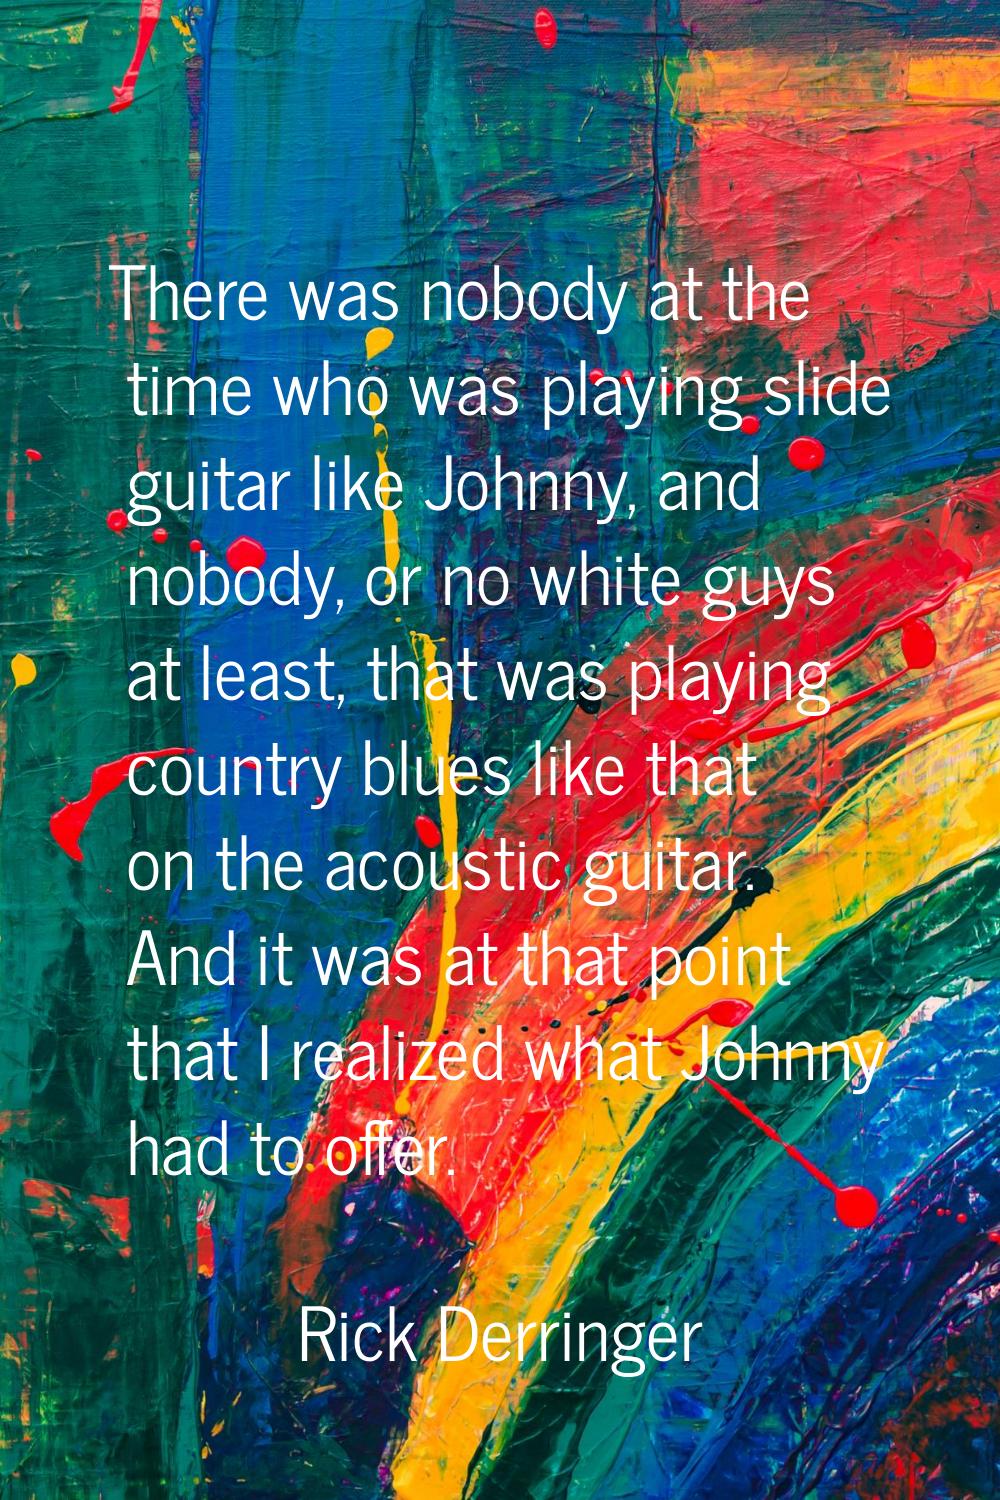 There was nobody at the time who was playing slide guitar like Johnny, and nobody, or no white guys